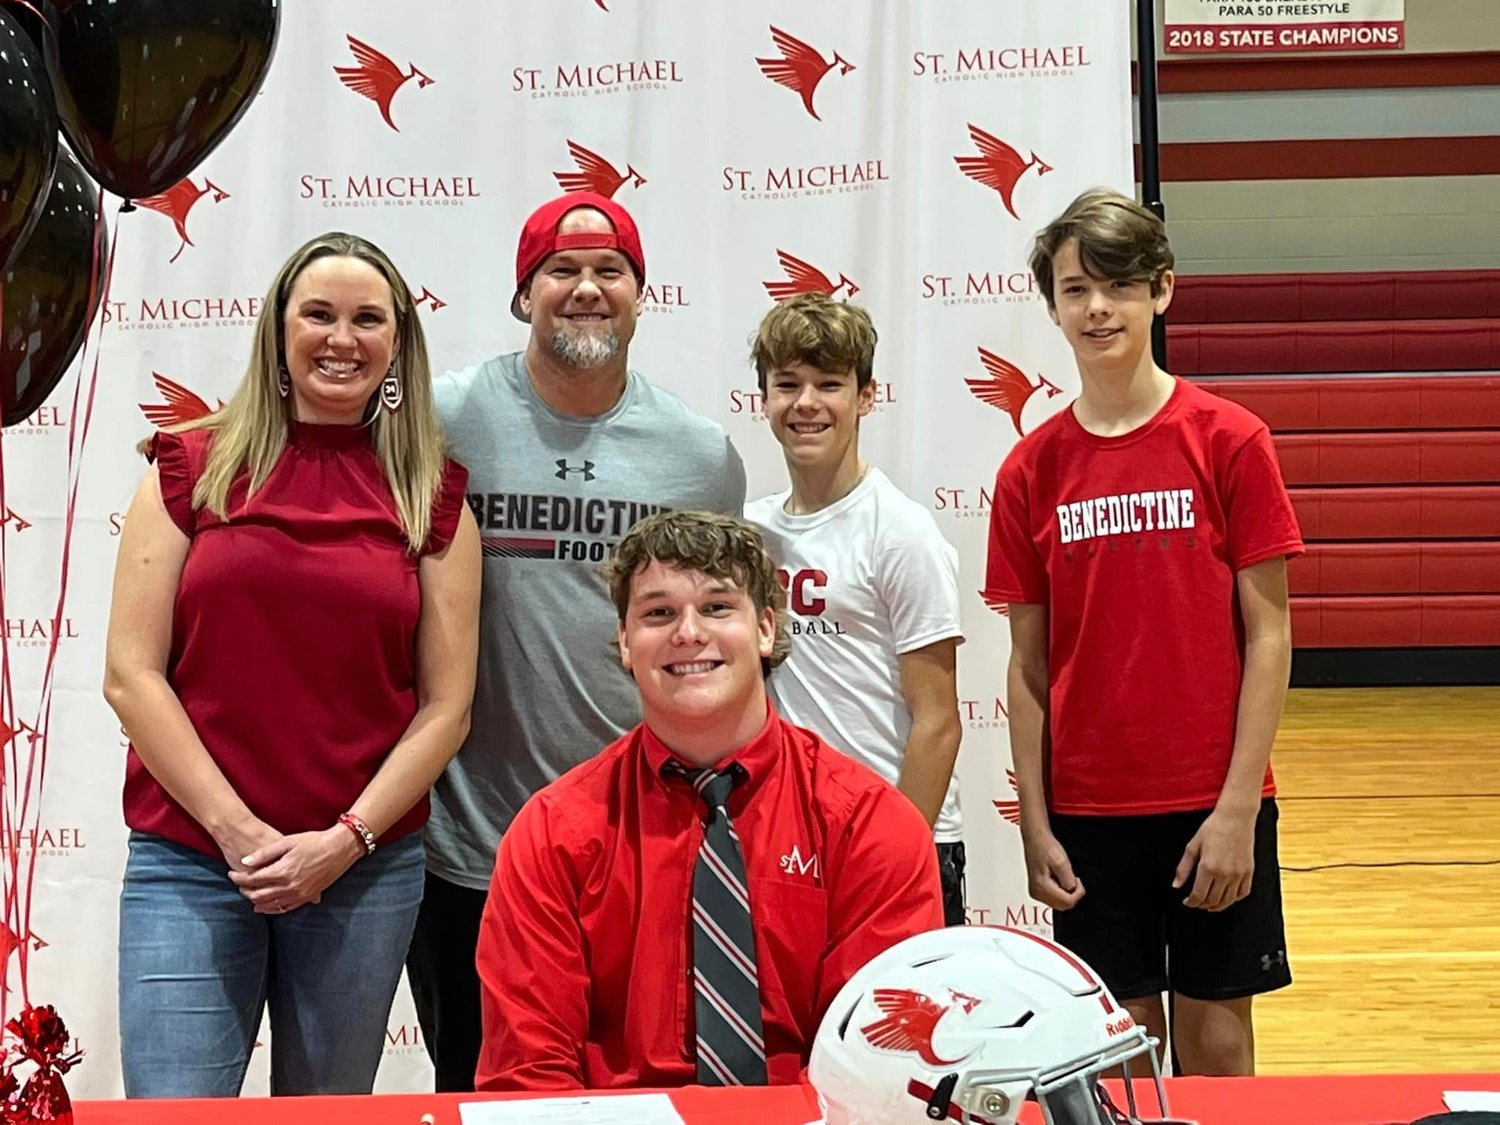 St. Michael Catholic senior Tyler Cella was joined by family in signing with the Benedictine Ravens during a Feb. 1 signing ceremony at the high school as part of National Signing Day. Cella was one of two Cardinals who put pen to paper Wednesday as Clay Barr signed with the Delta State Statesmen.